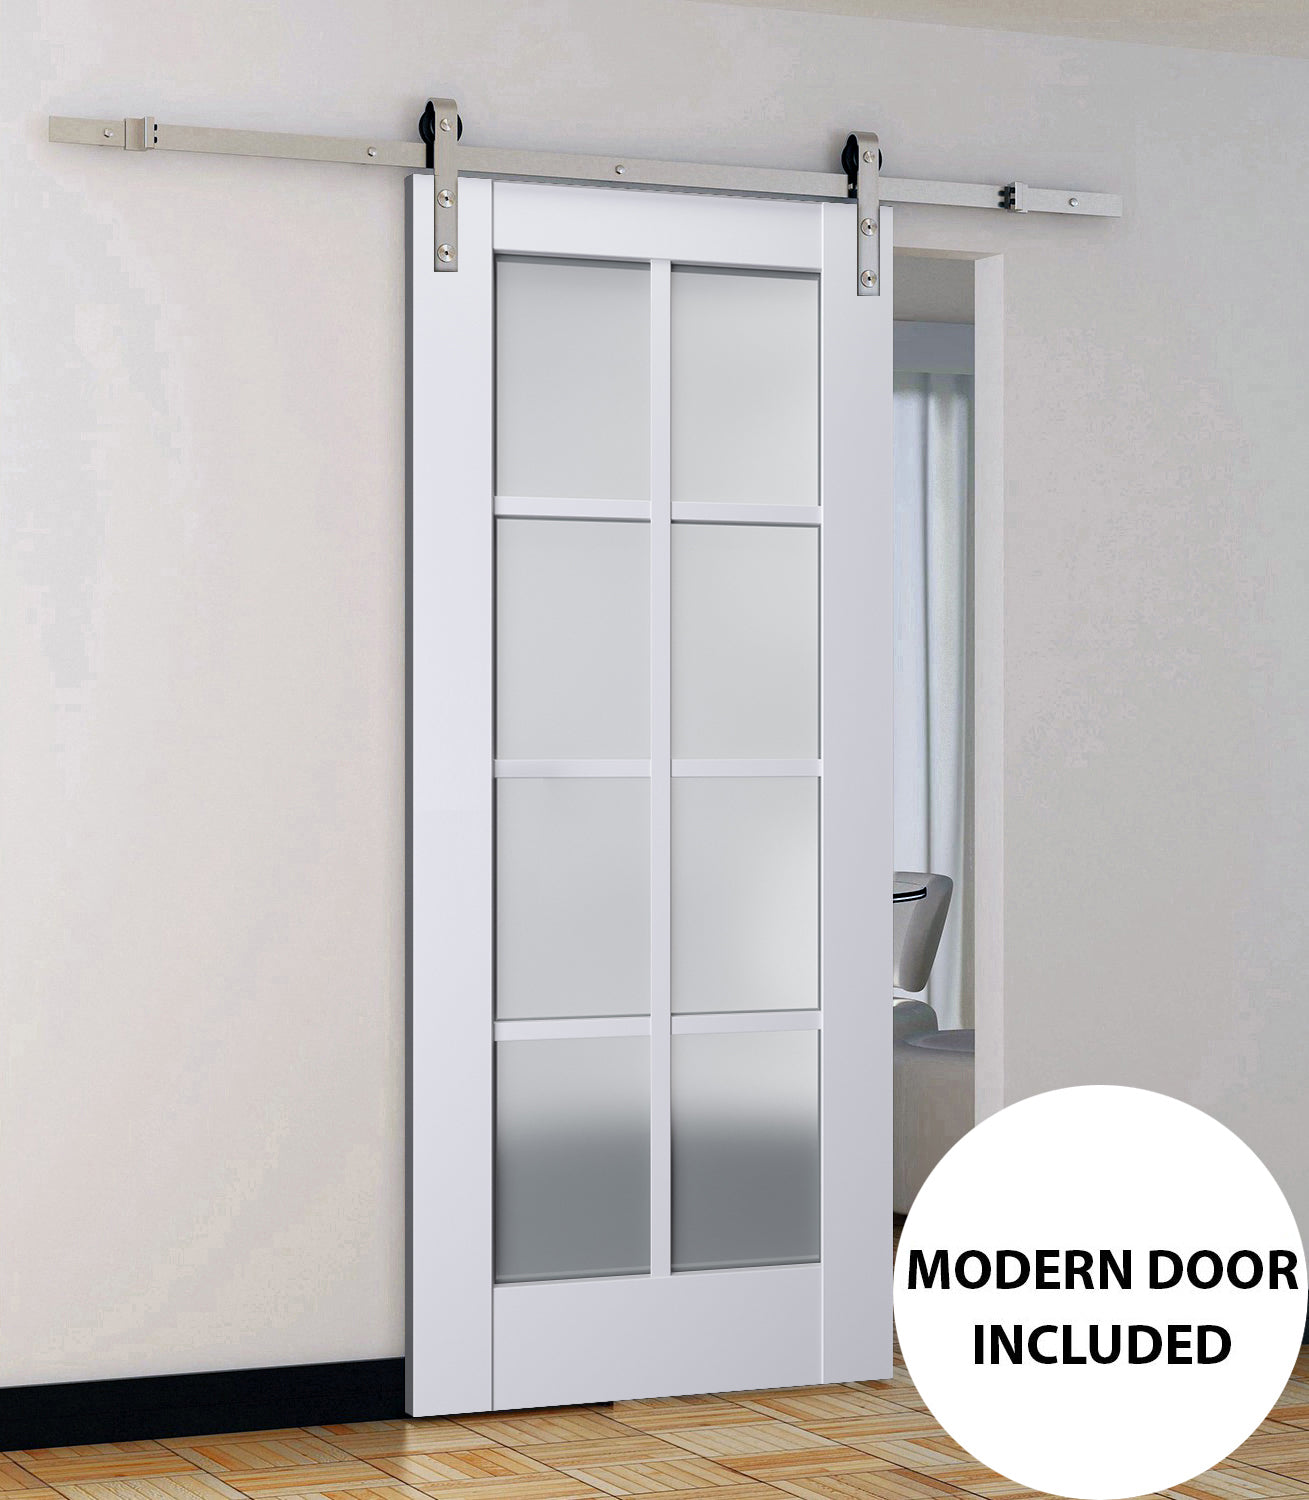 Veregio 7412 Matte White Barn Door with Frosted Glass and Silver Finish Rail